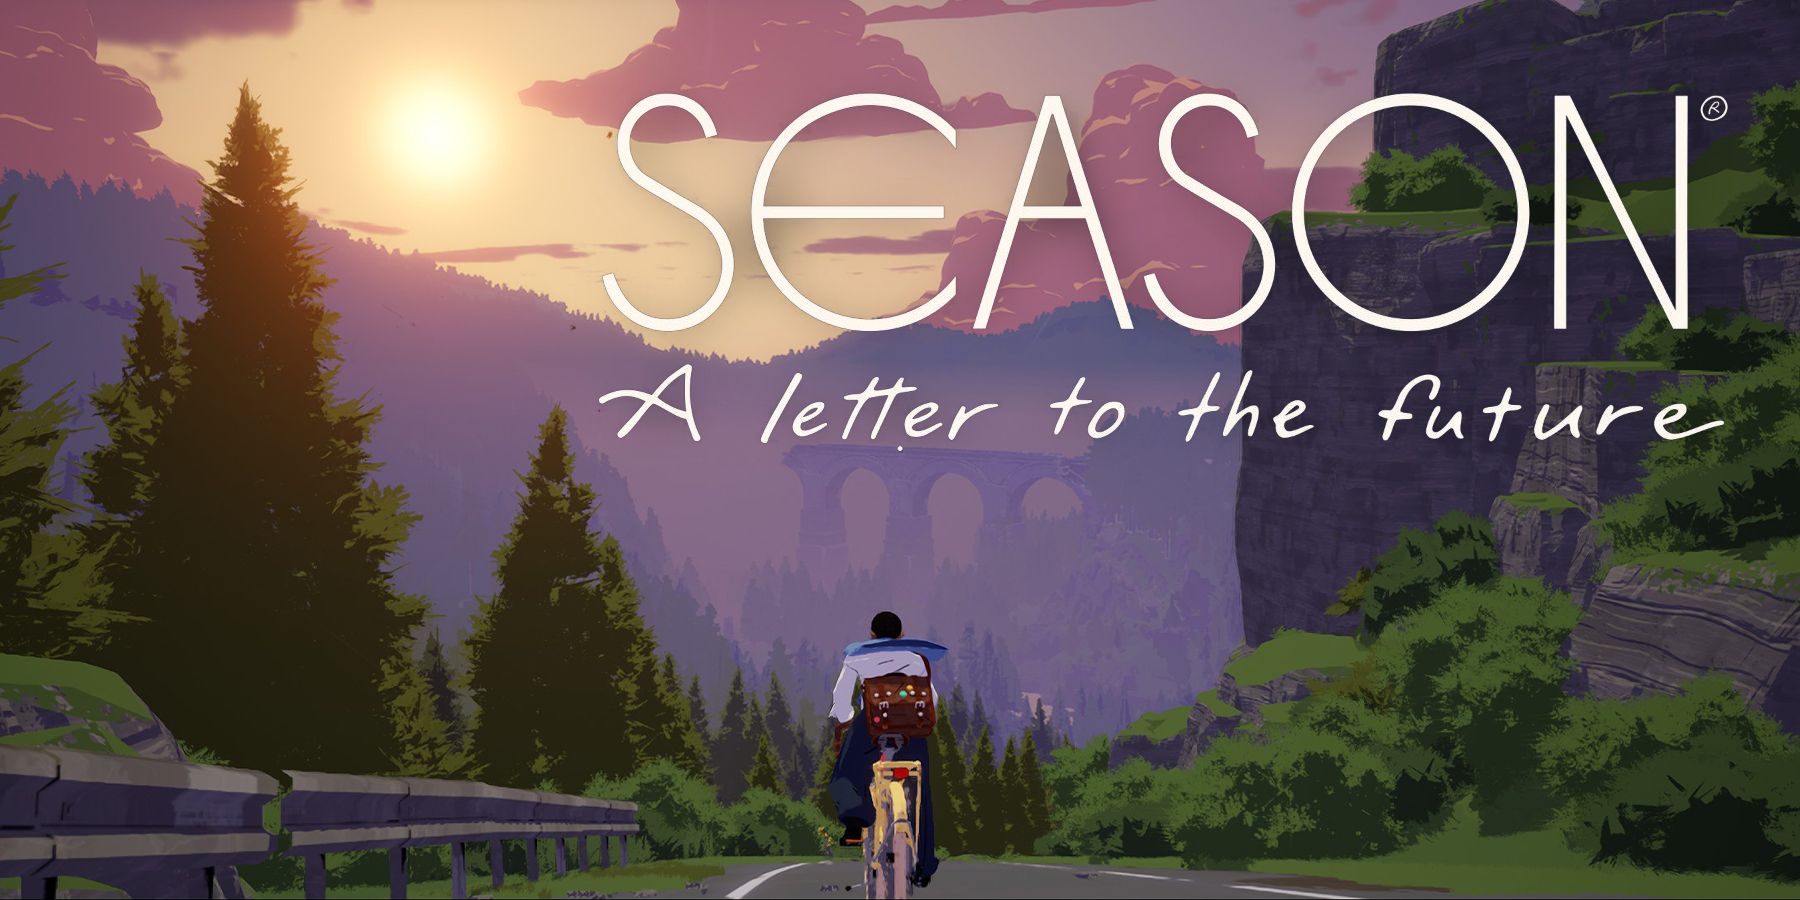 season letter to the future review protagonist on bike